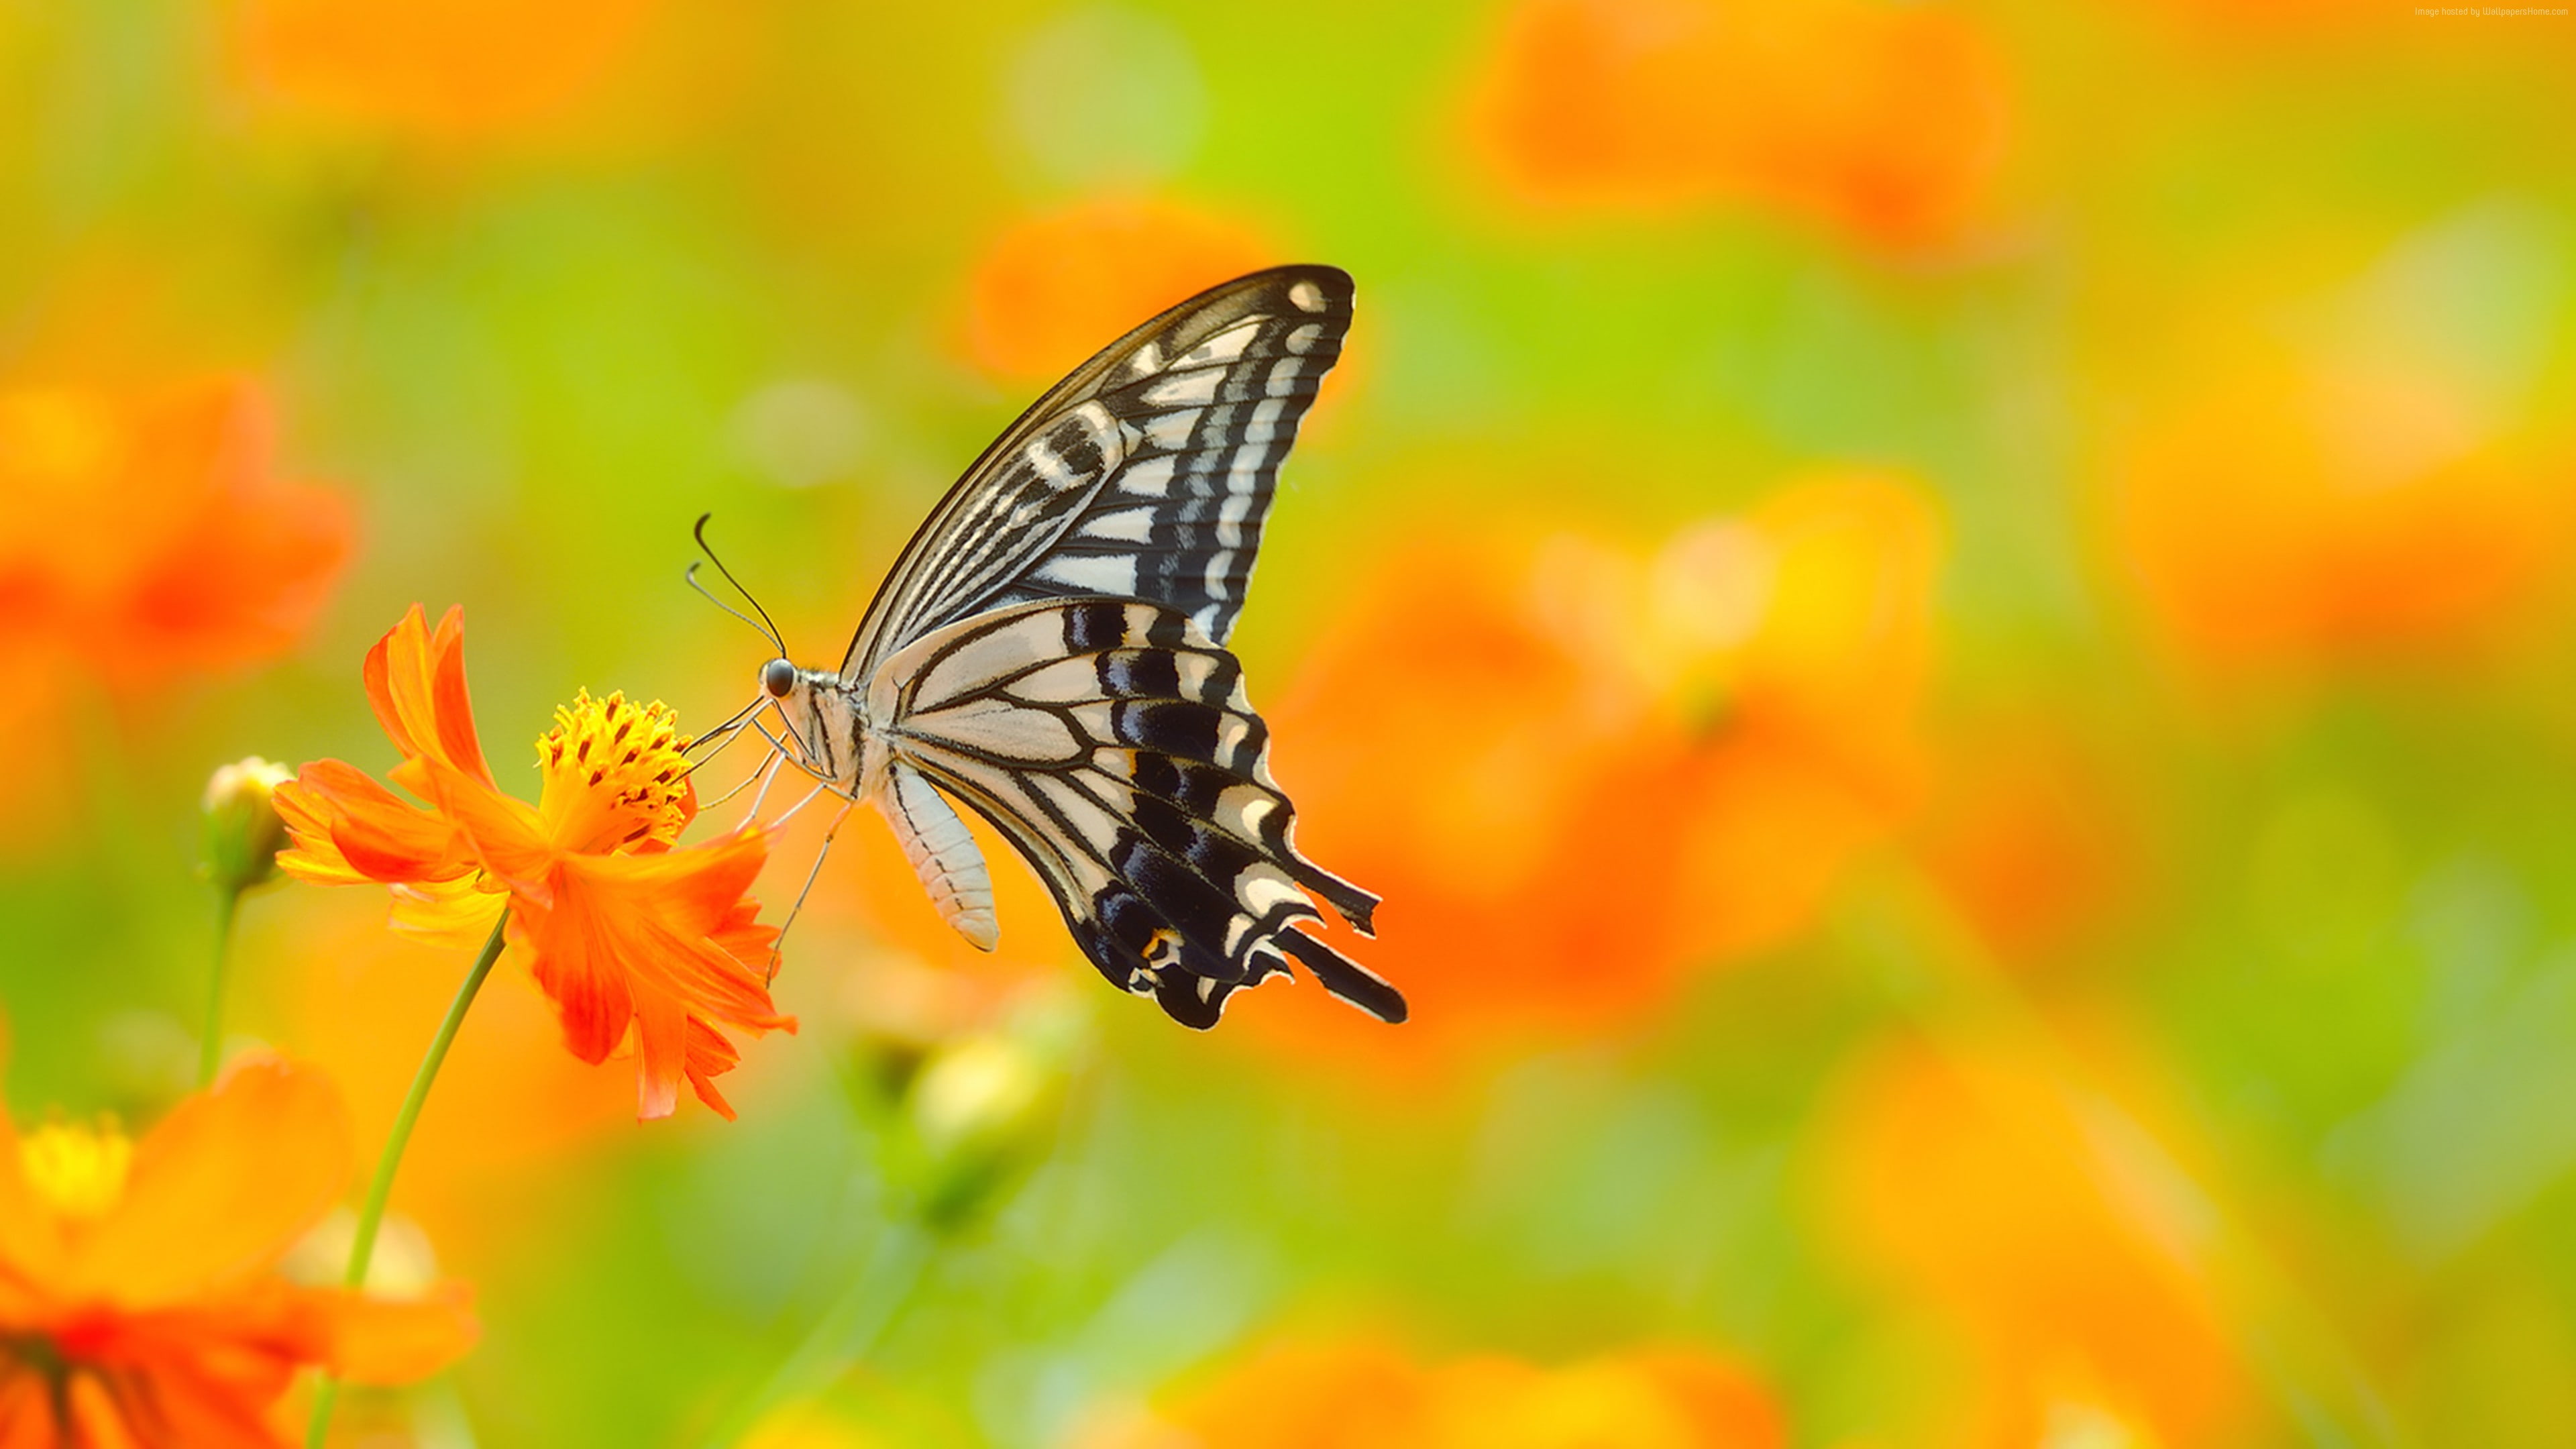 5k, colorful, flowers, insects, butterfly, 4k, yellow